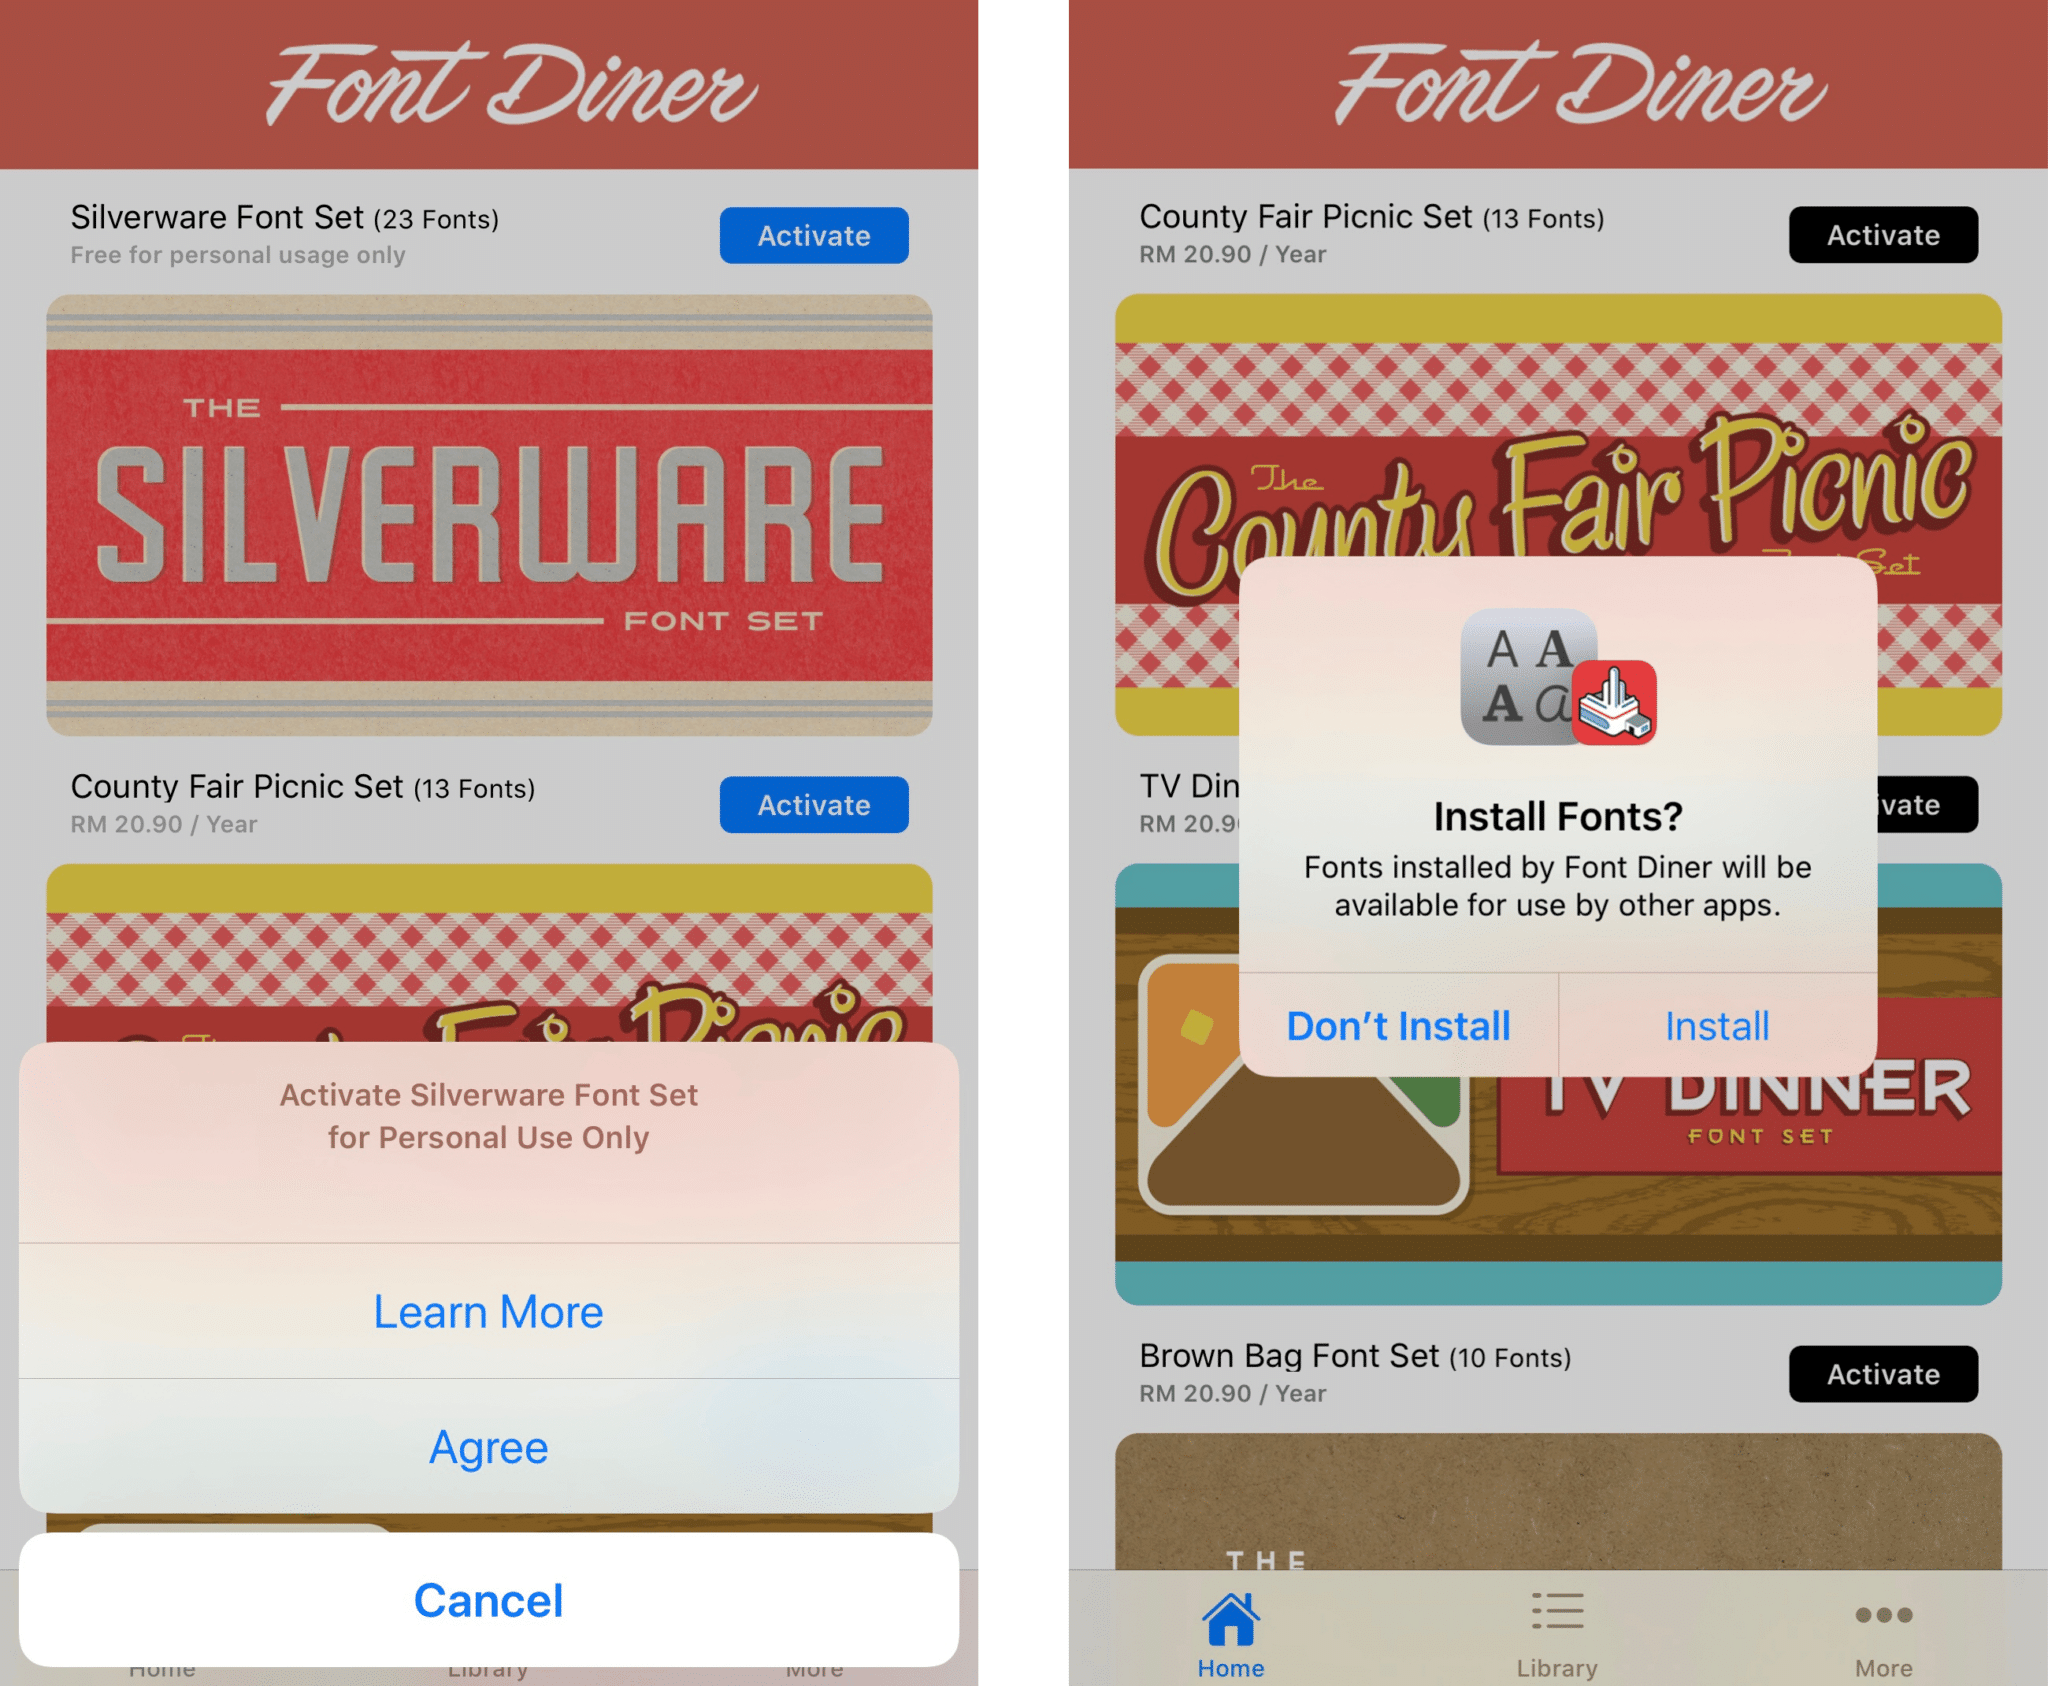 Installing or adding Custom Fonts with Font Diner on IOS 13